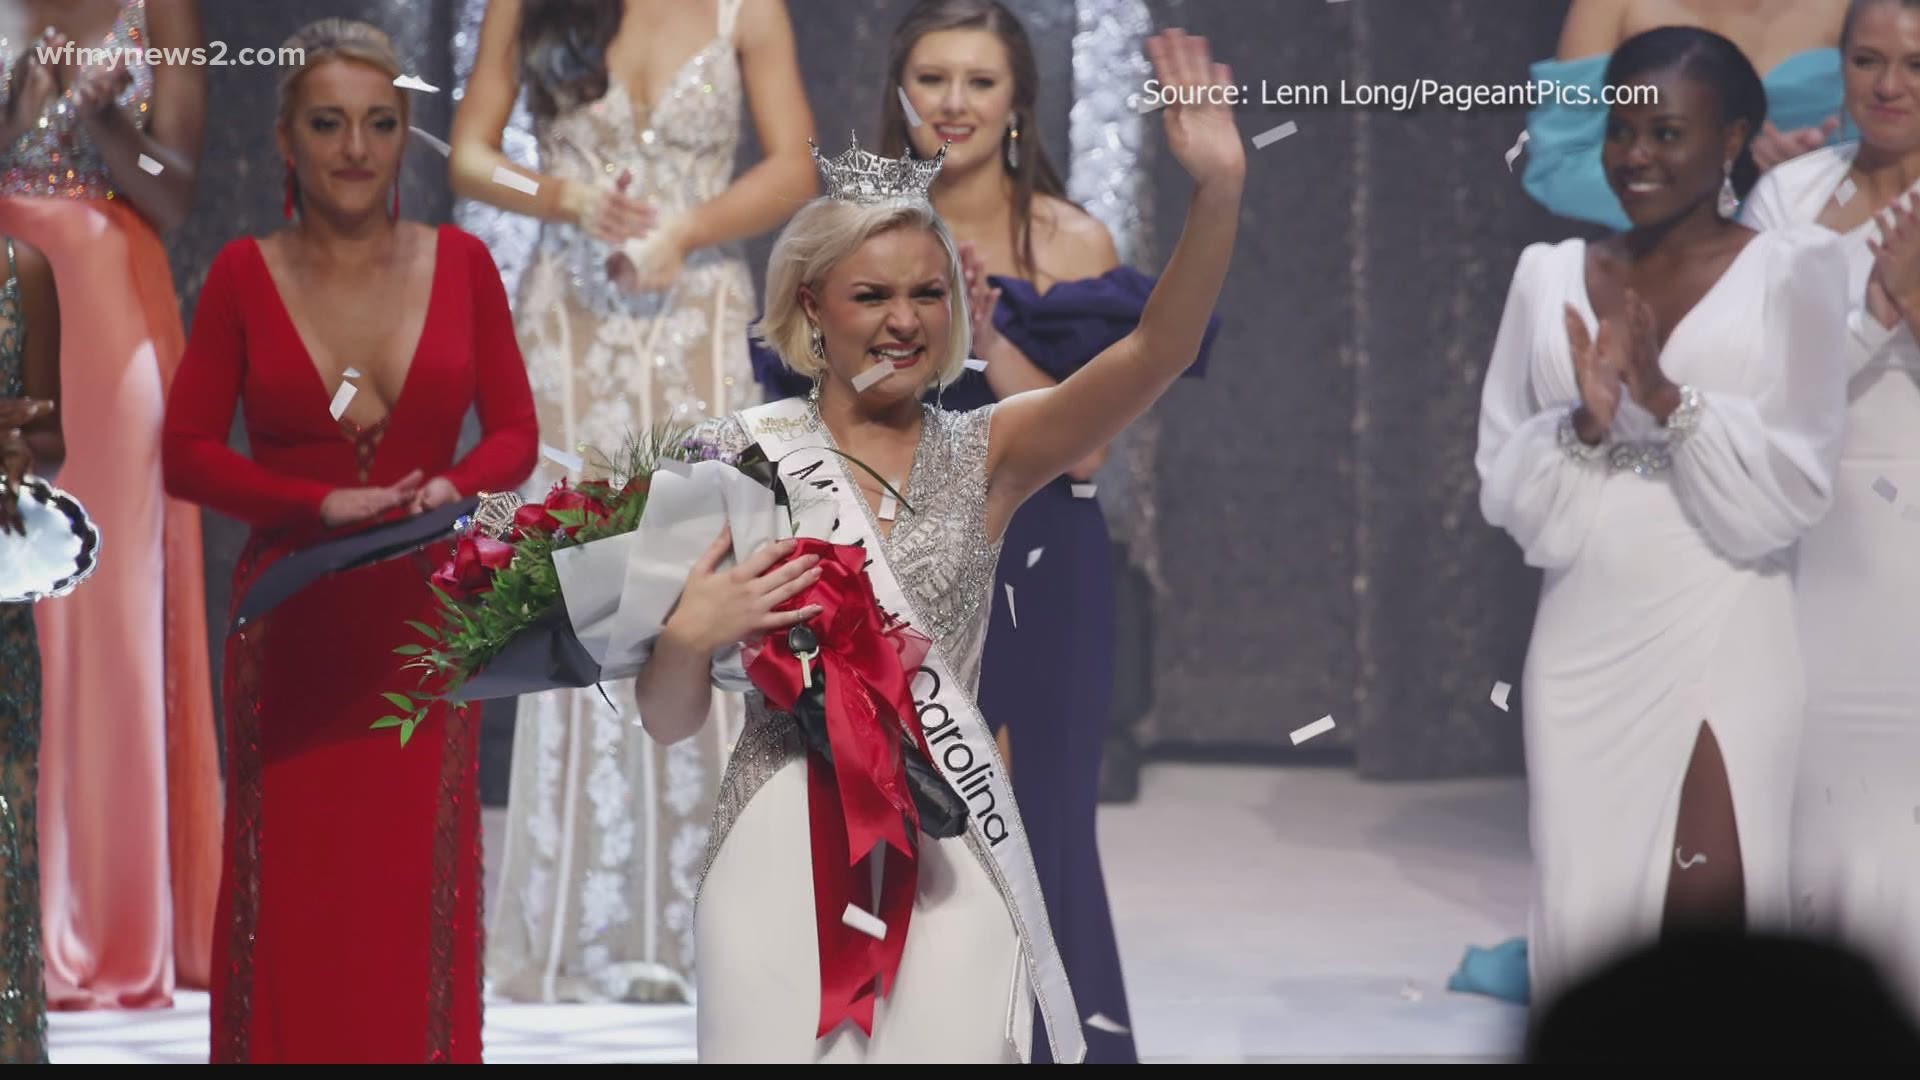 Wilmington native and App State Senior Carli Batson is crowned Miss North Carolina 2021 and will represent the state at the Miss America pageant in December.